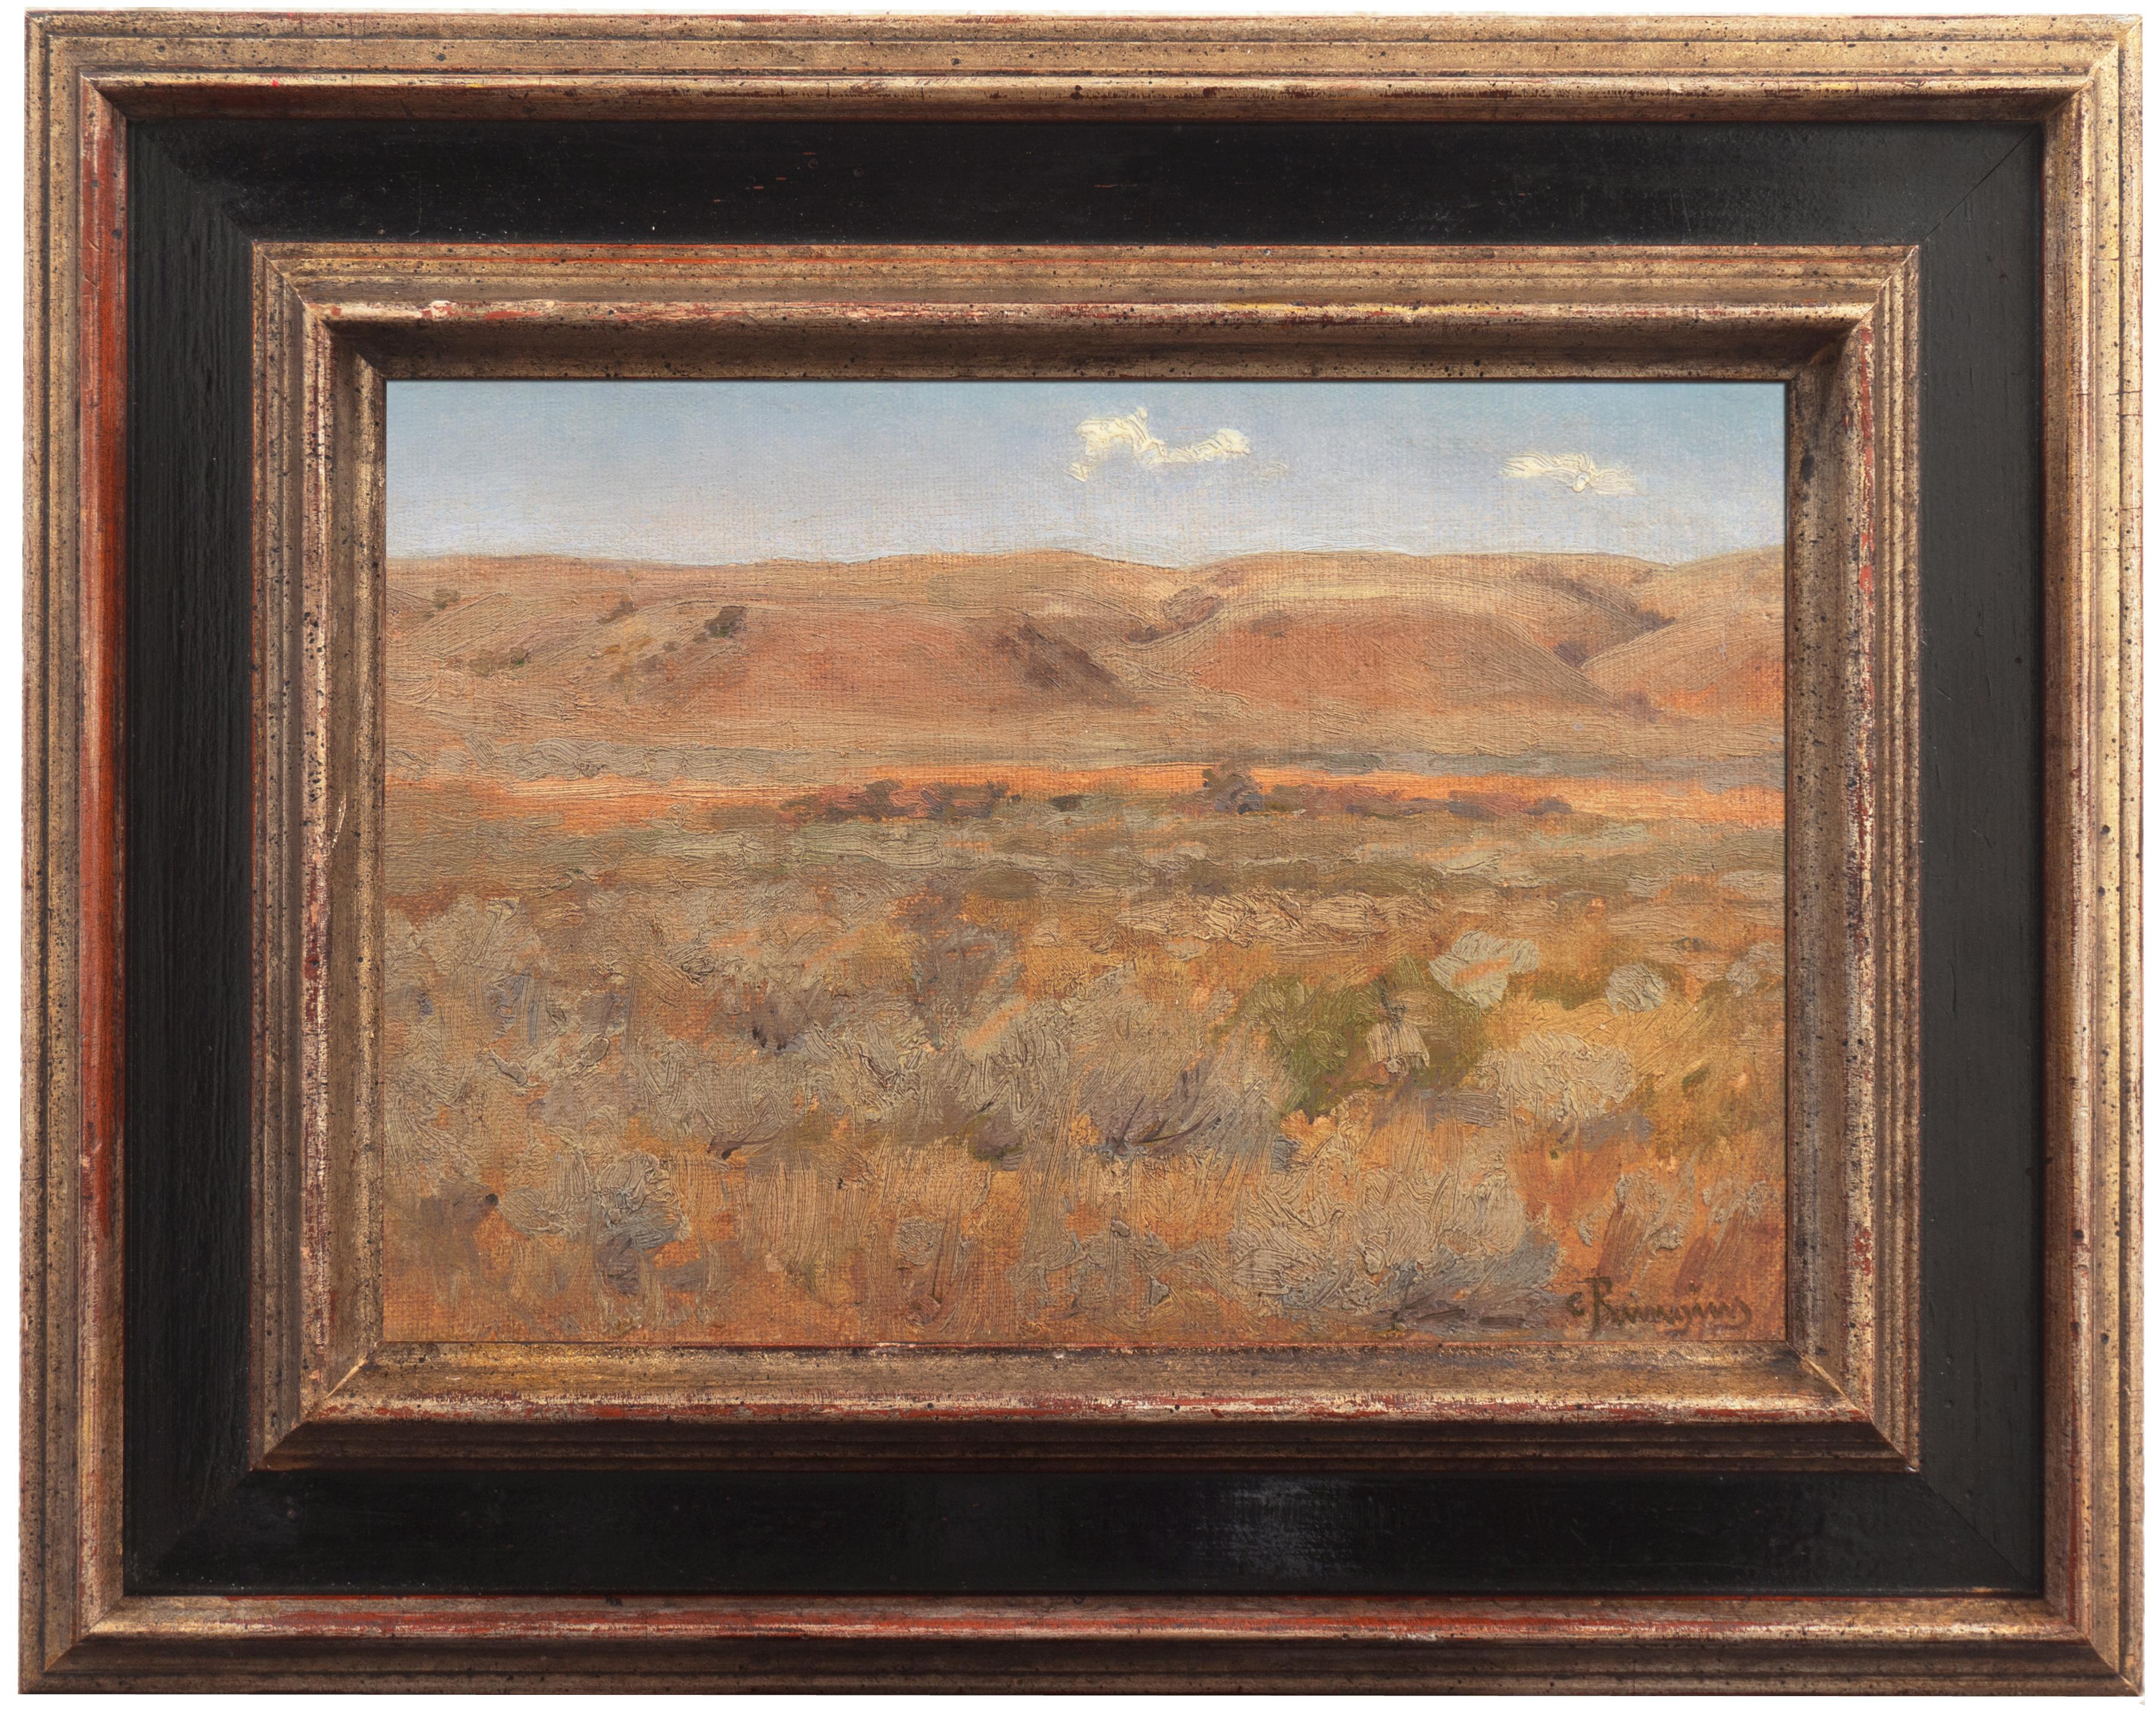 Signed lower right, 'C. Rungius' for Carl Rungius (German-American, 1869-1959) and titled, verso, 'Montana Landscape VIII'. 
Displayed in an ebony painted and gilt-wood frame. Framed dimensions: 13 H x 16 W x 1.5 D inches.

Born in Germany, Carl